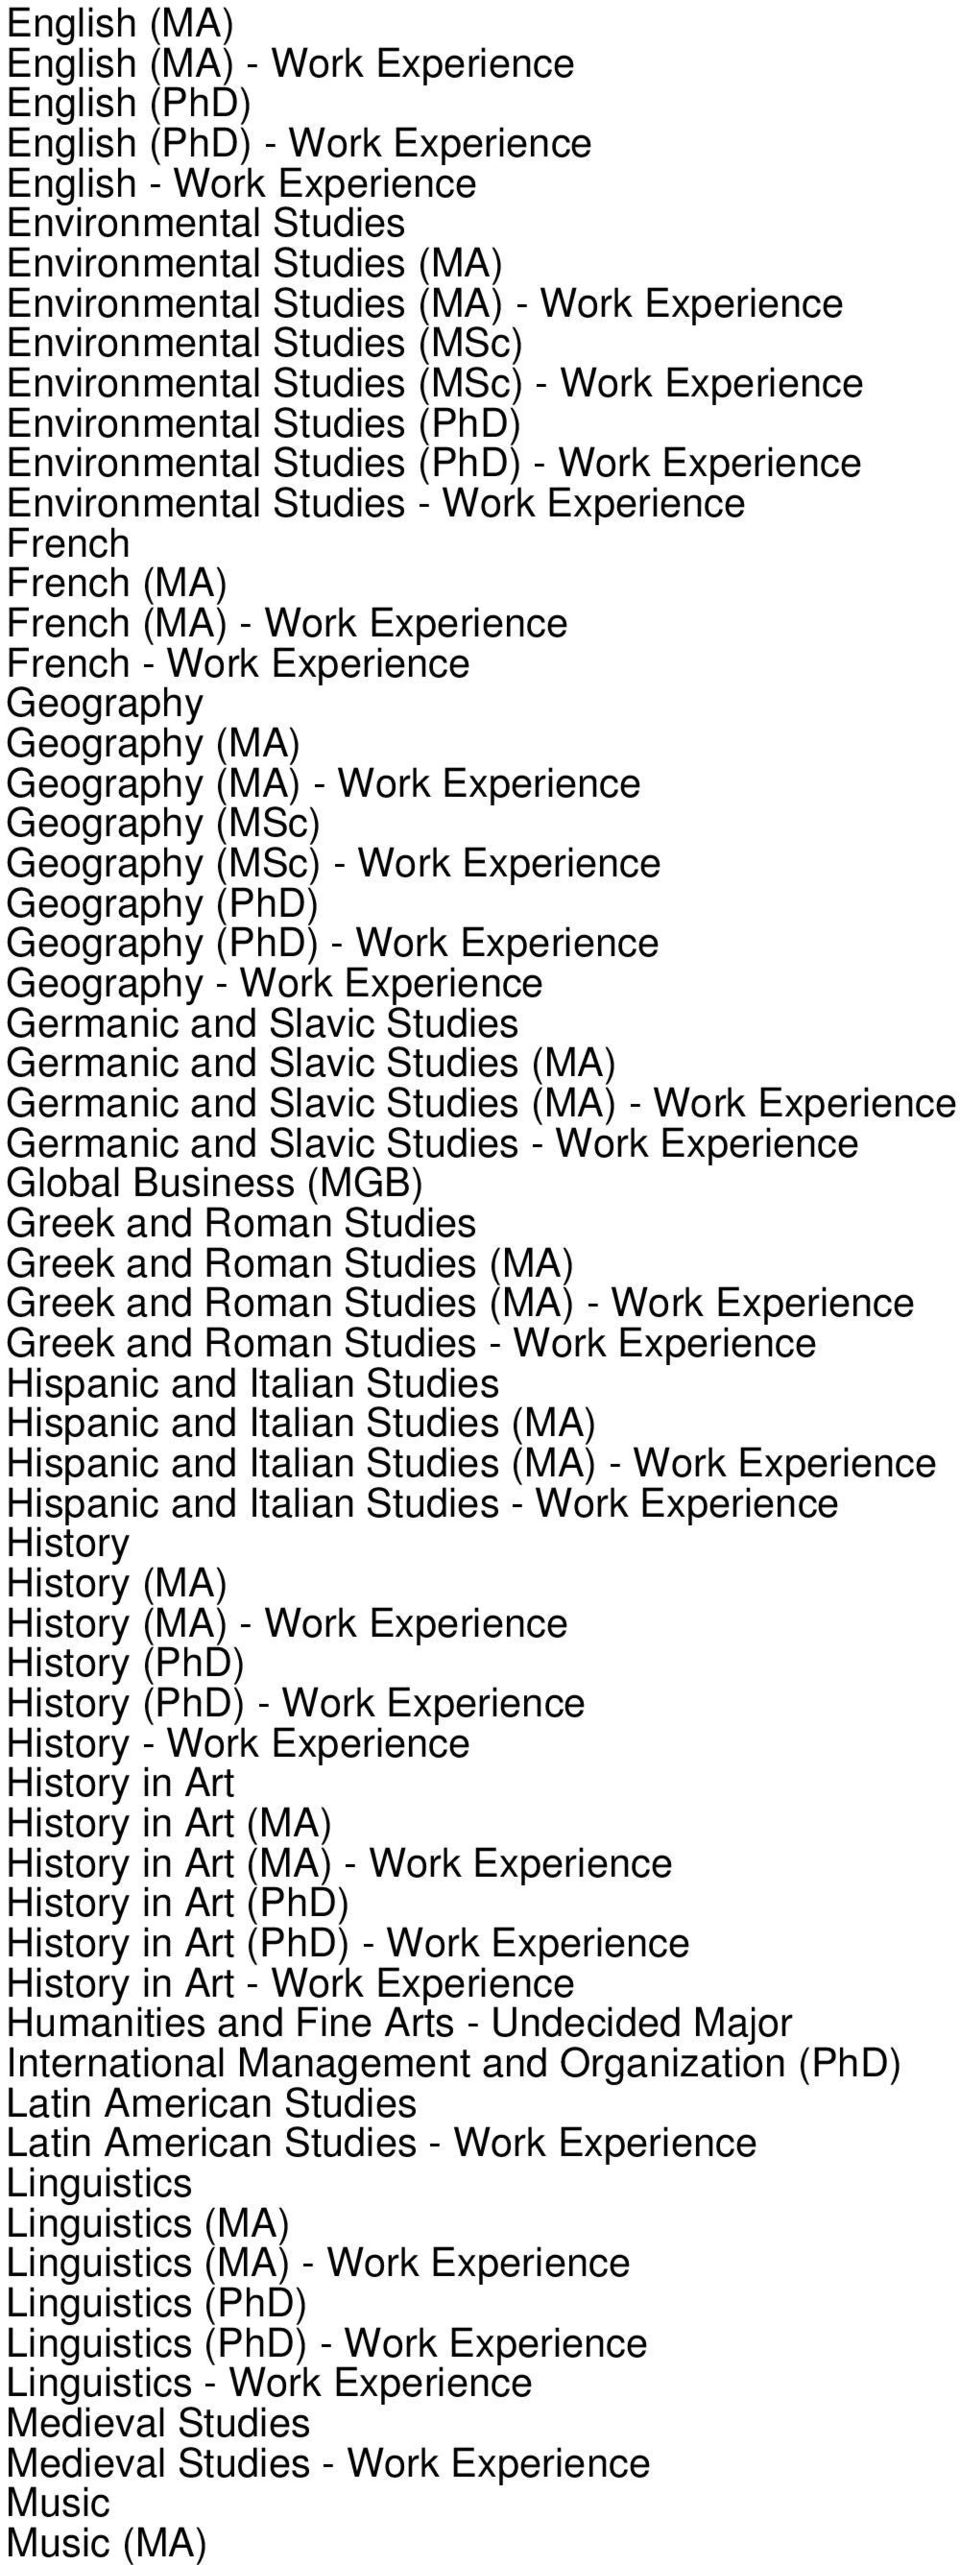 French French (MA) French (MA) - Work Experience French - Work Experience Geography Geography (MA) Geography (MA) - Work Experience Geography (MSc) Geography (MSc) - Work Experience Geography (PhD)